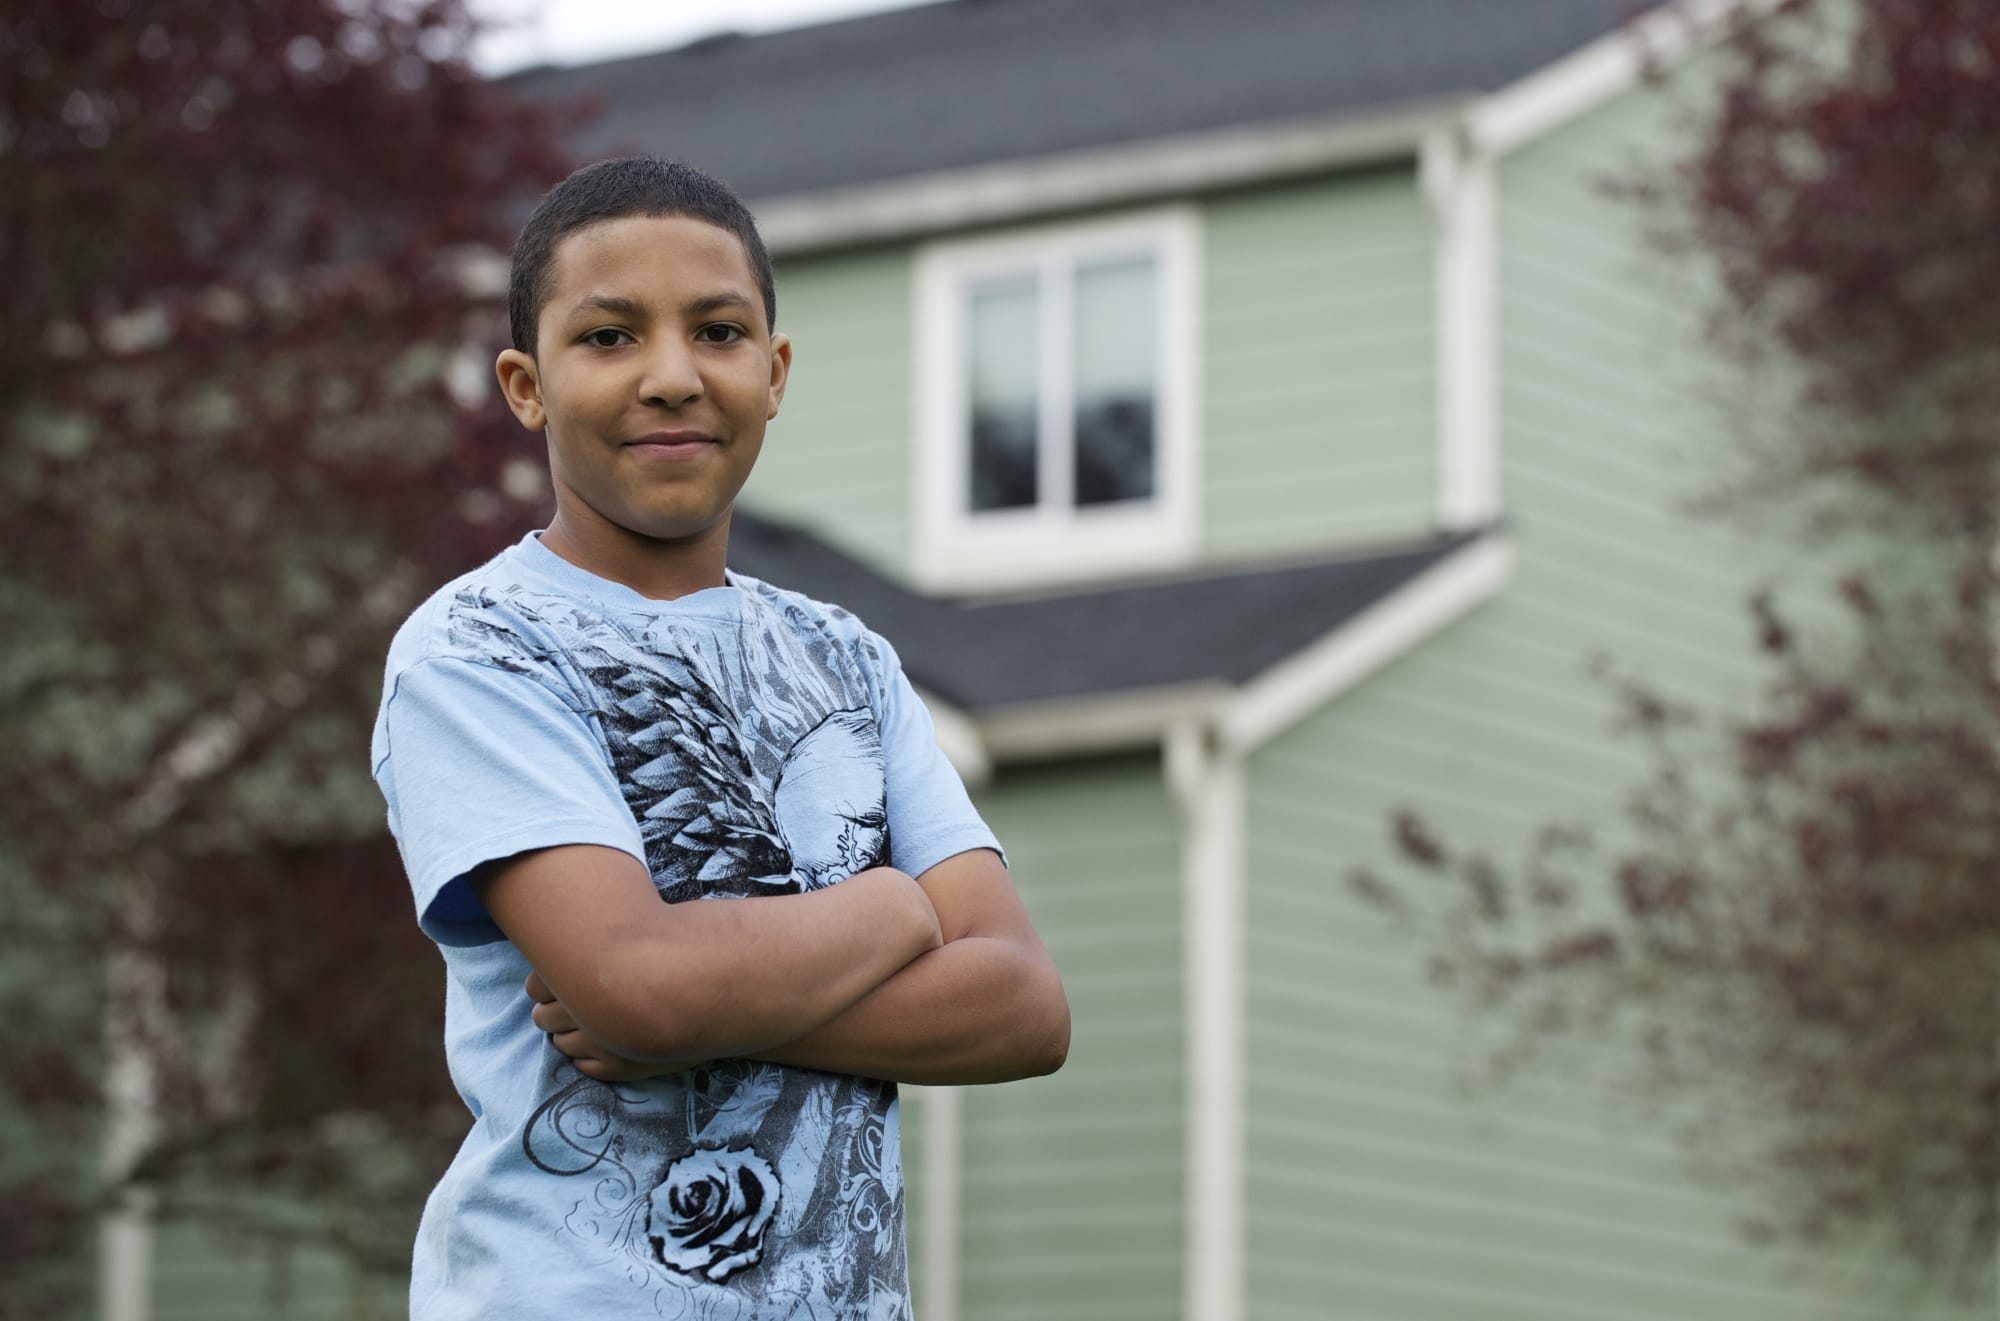 Damon Davenport, 13, is credited with rescuing an 18-month-old boy from the roof of an apartment at the Prairie View Apartments in Orchards on Sunday afternoon, April 29, 2012. The toddler's 2-year-old brother fell from the roof minutes earlier but was not seriously injured.